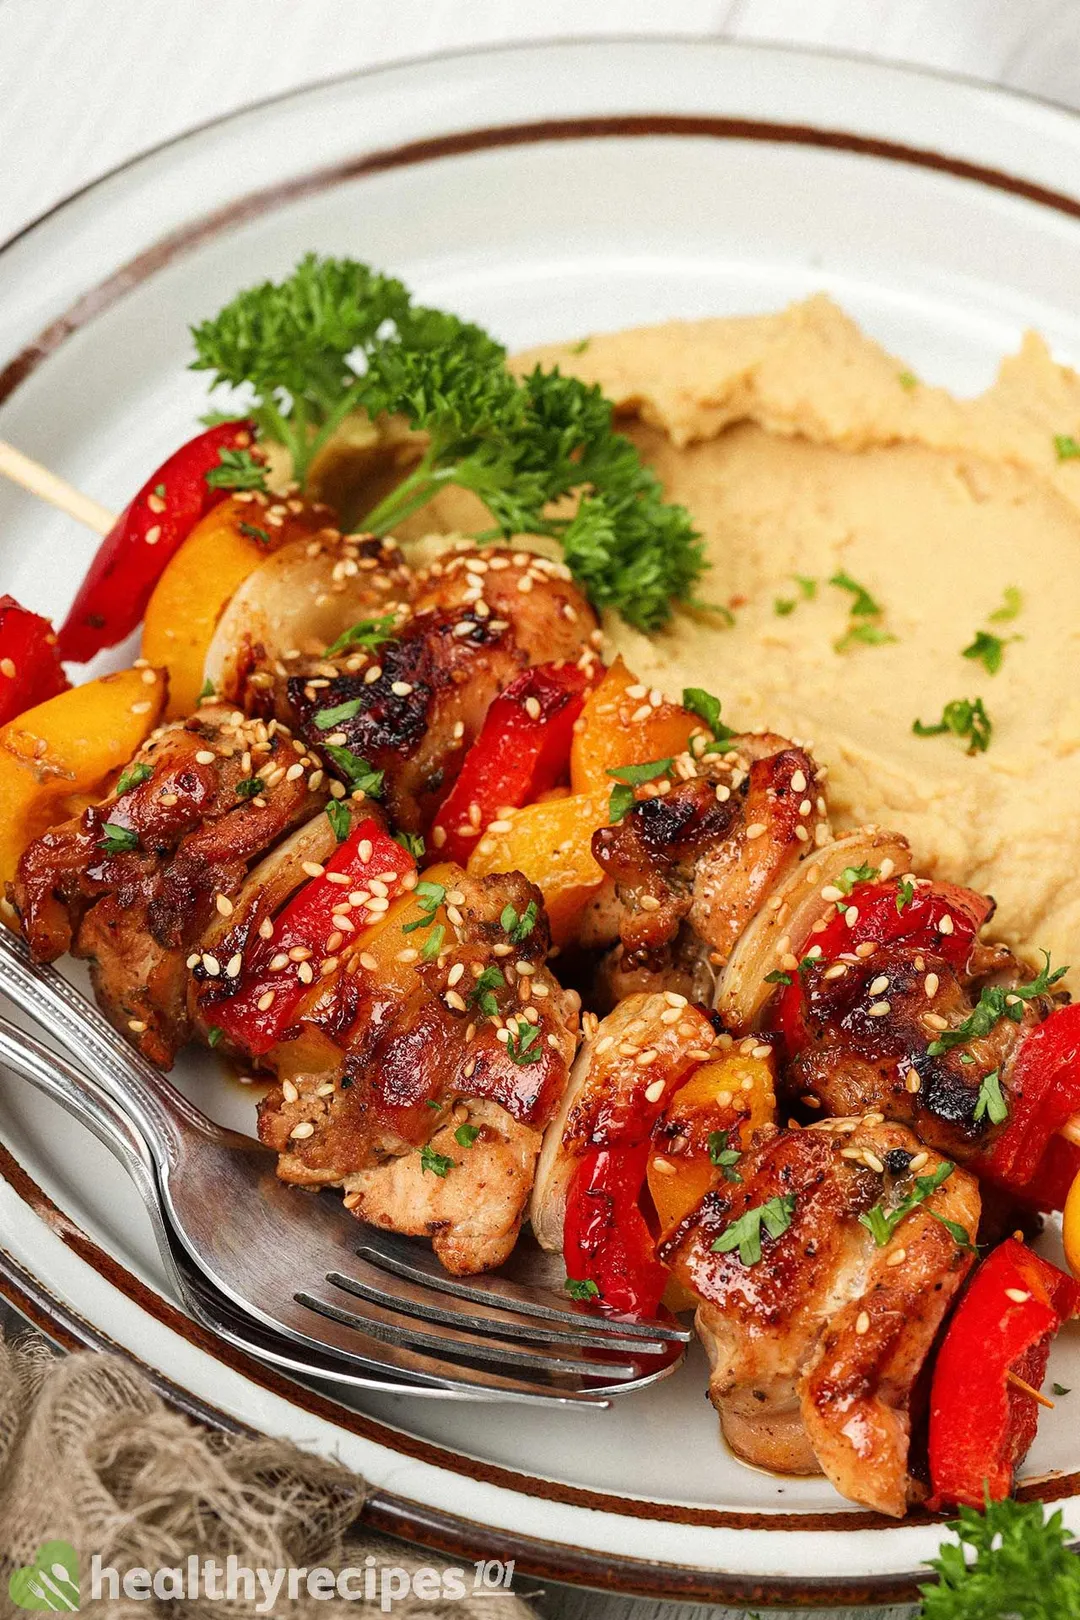 A close-up shot of a plate of chicken skewers served with chickpea puree